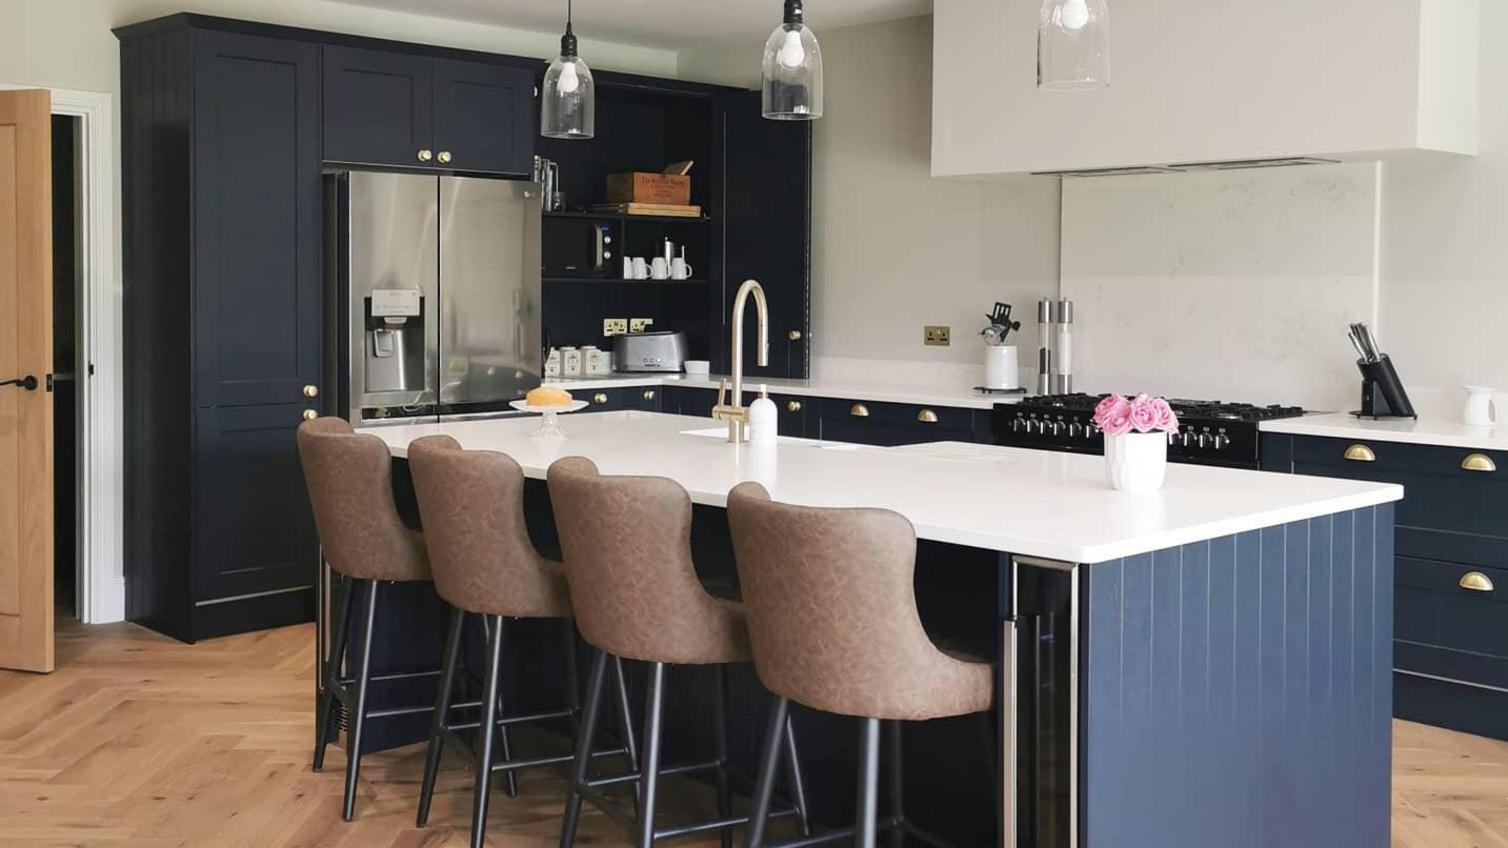 Navy blue shaker kitchen with an island layout, featuring oak chevron flooring, pendant lights and a white quarts worktop.